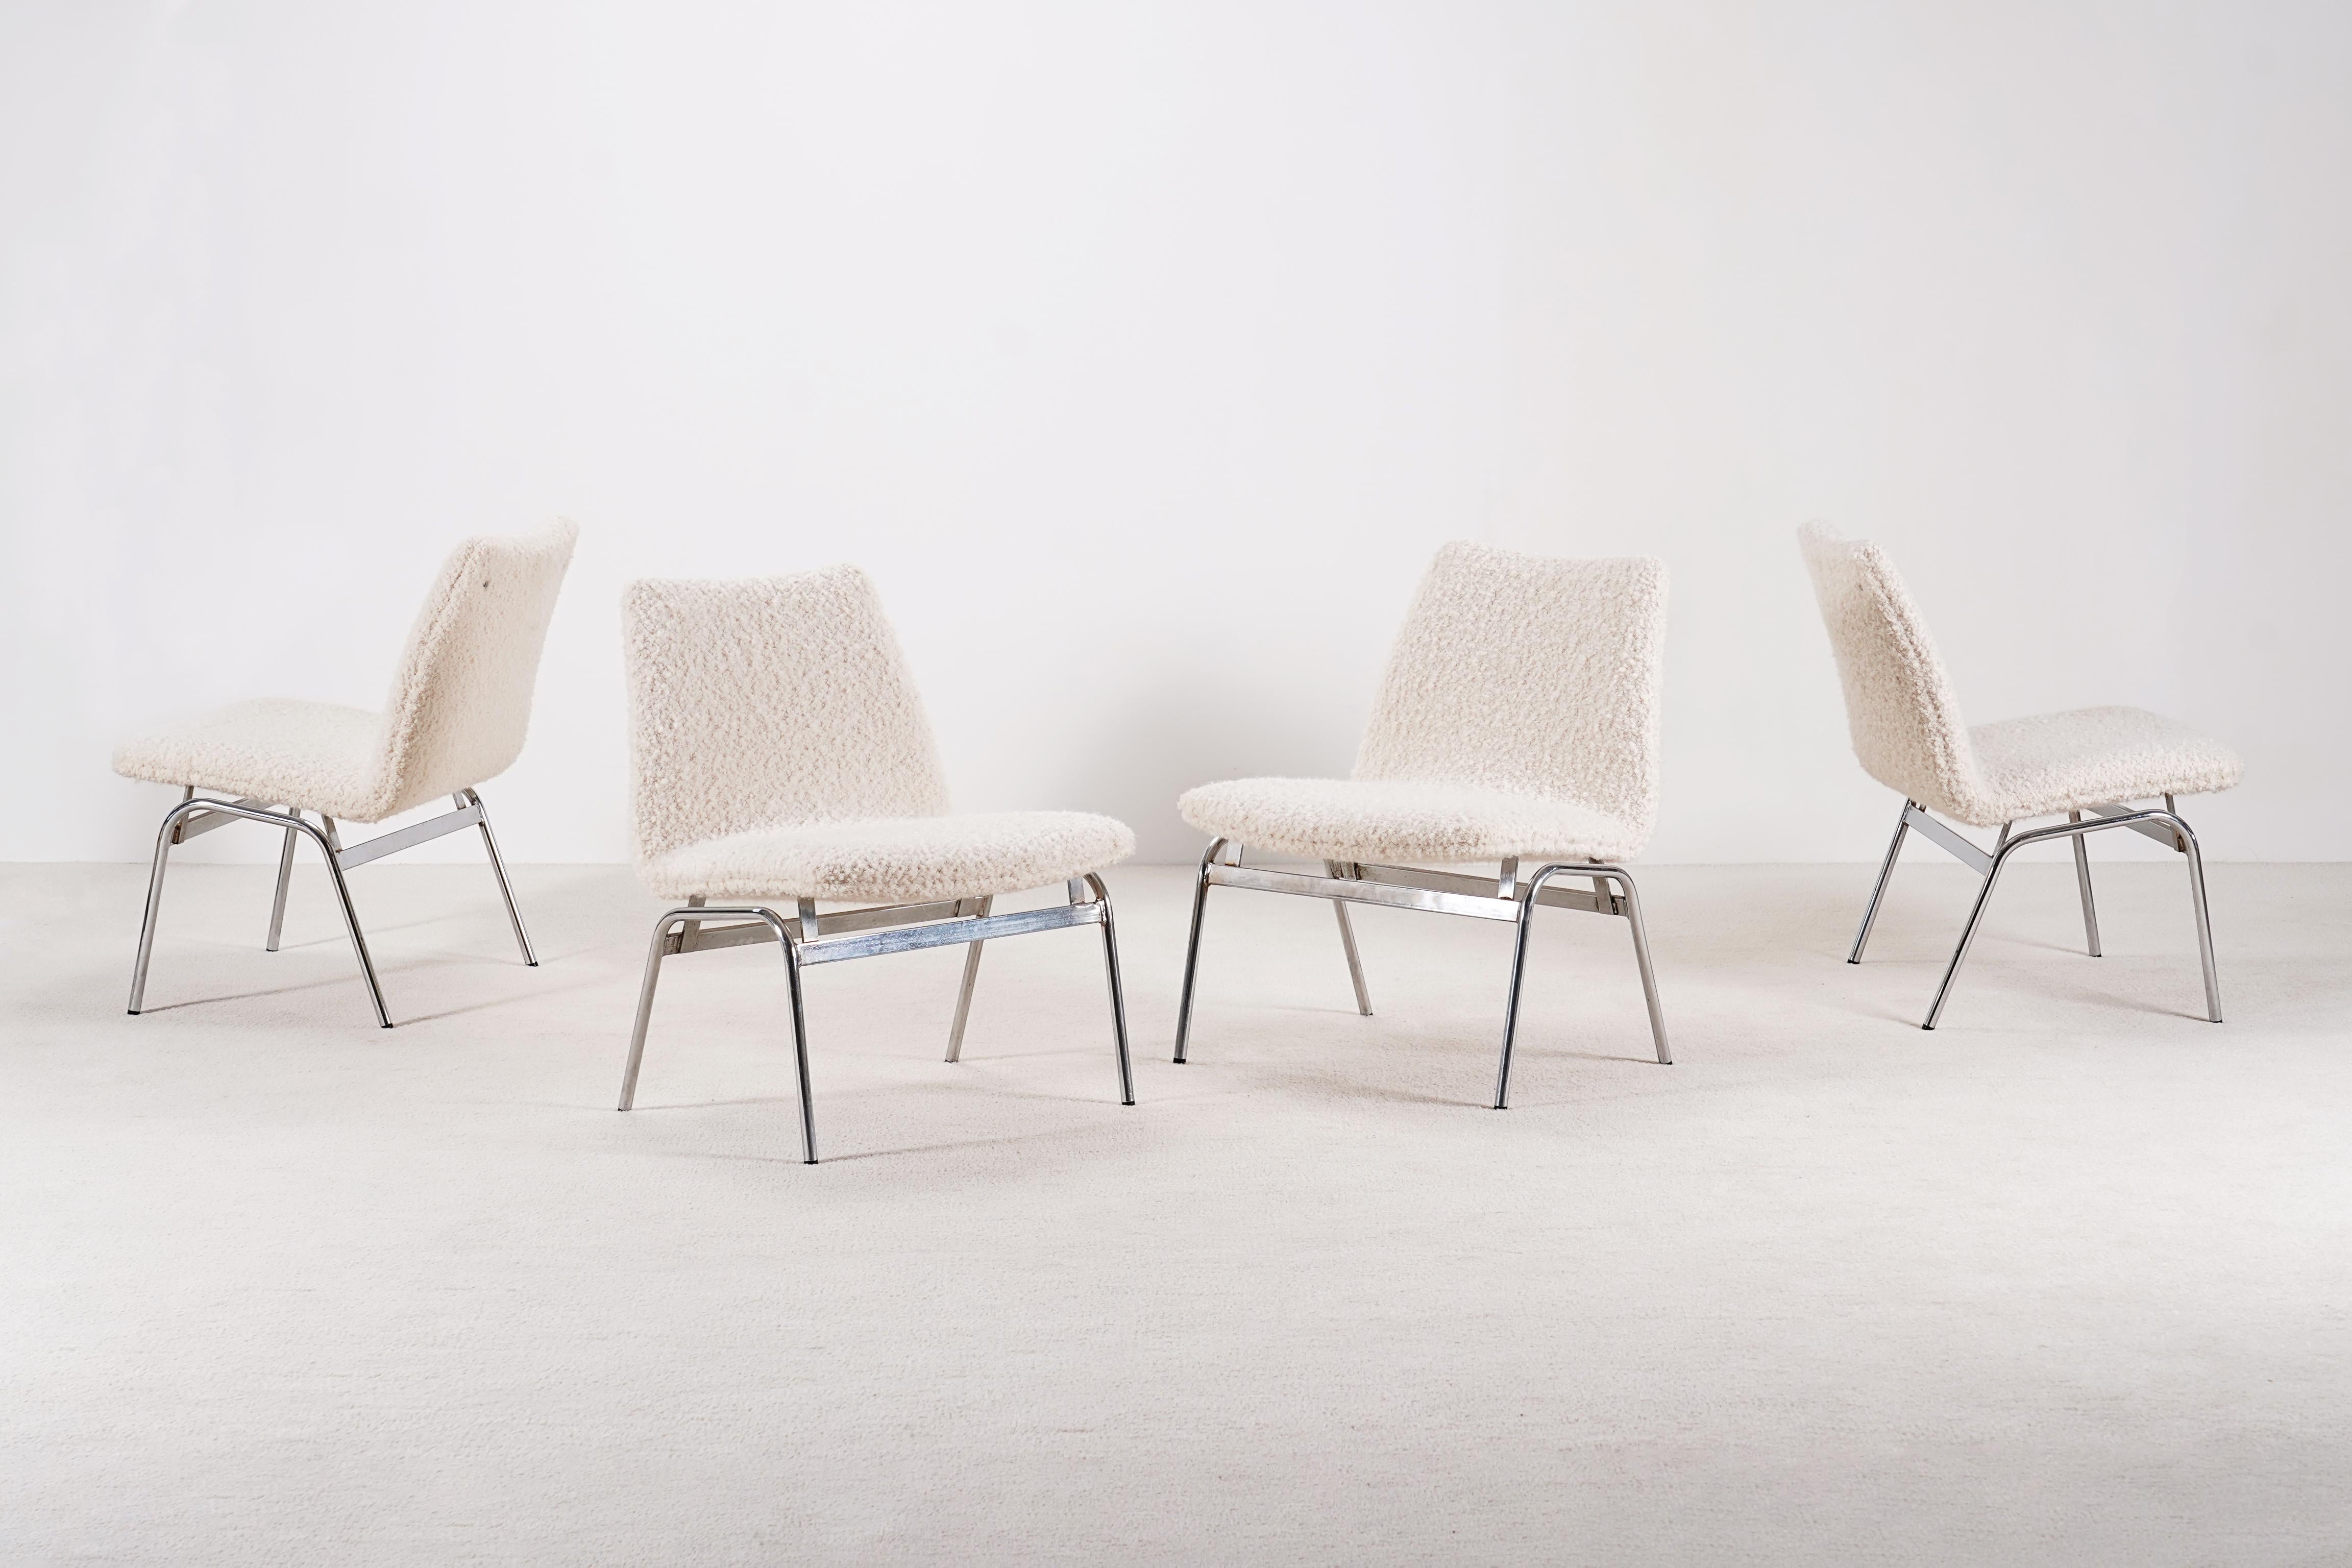 Set of 4 Danish lounge chairs produced by Duba in the 1970s.

These easy chairs were manufactured for Copenhagen airport. 

We used a high-quality bouclé wool fabric from the French house Nobilis. 

Chromed tubular steel structure.

Very good